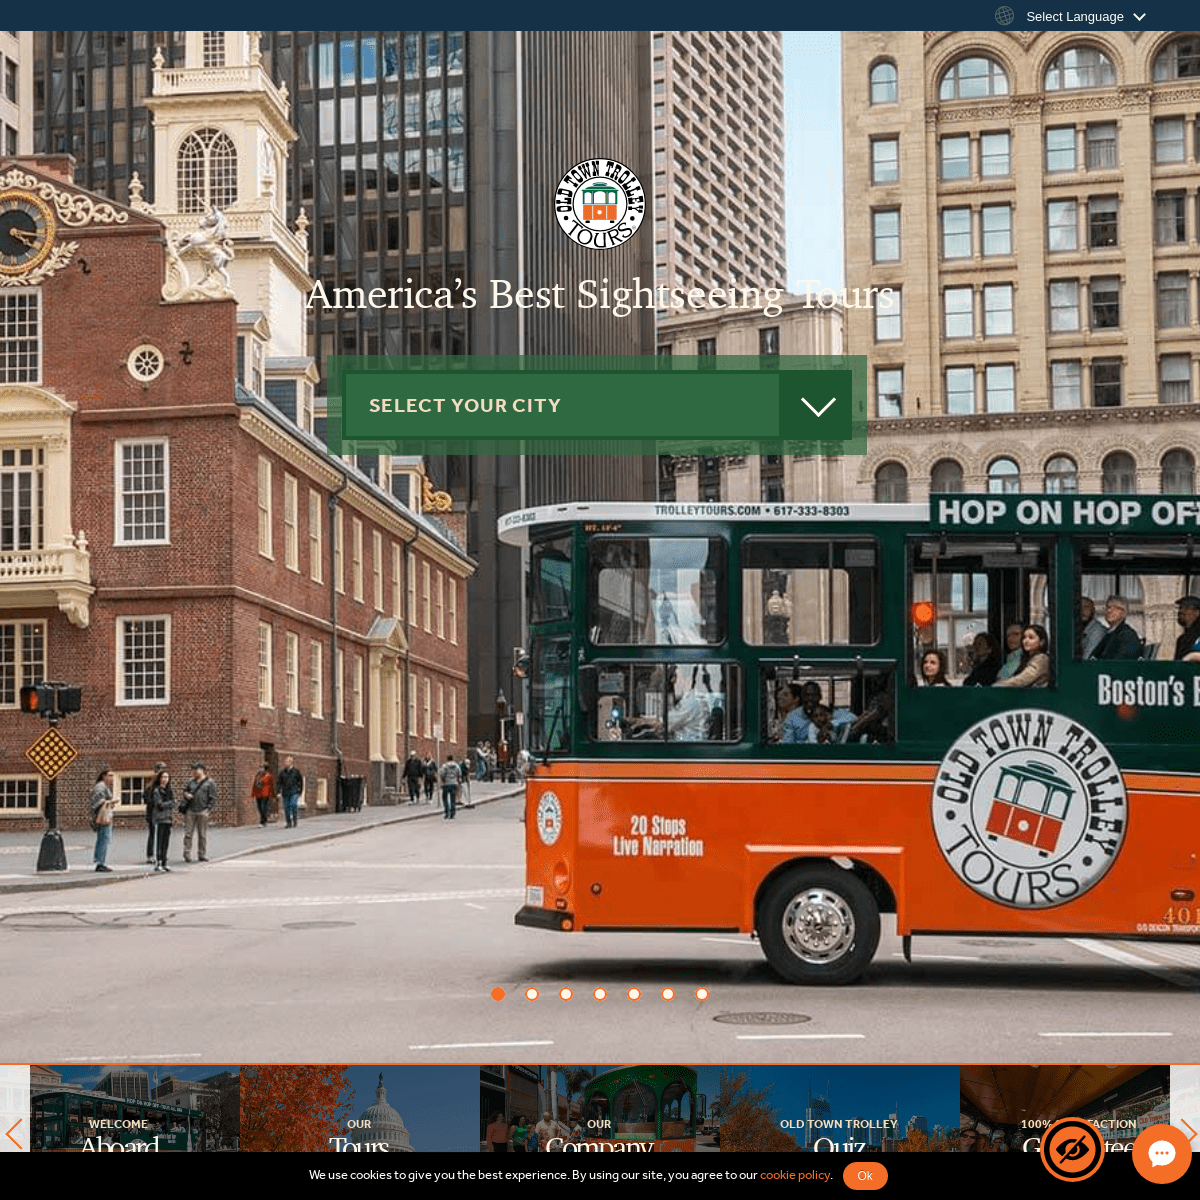 The Best Sightseeing Tours In 7 US Cities - Old Town Trolley Tours